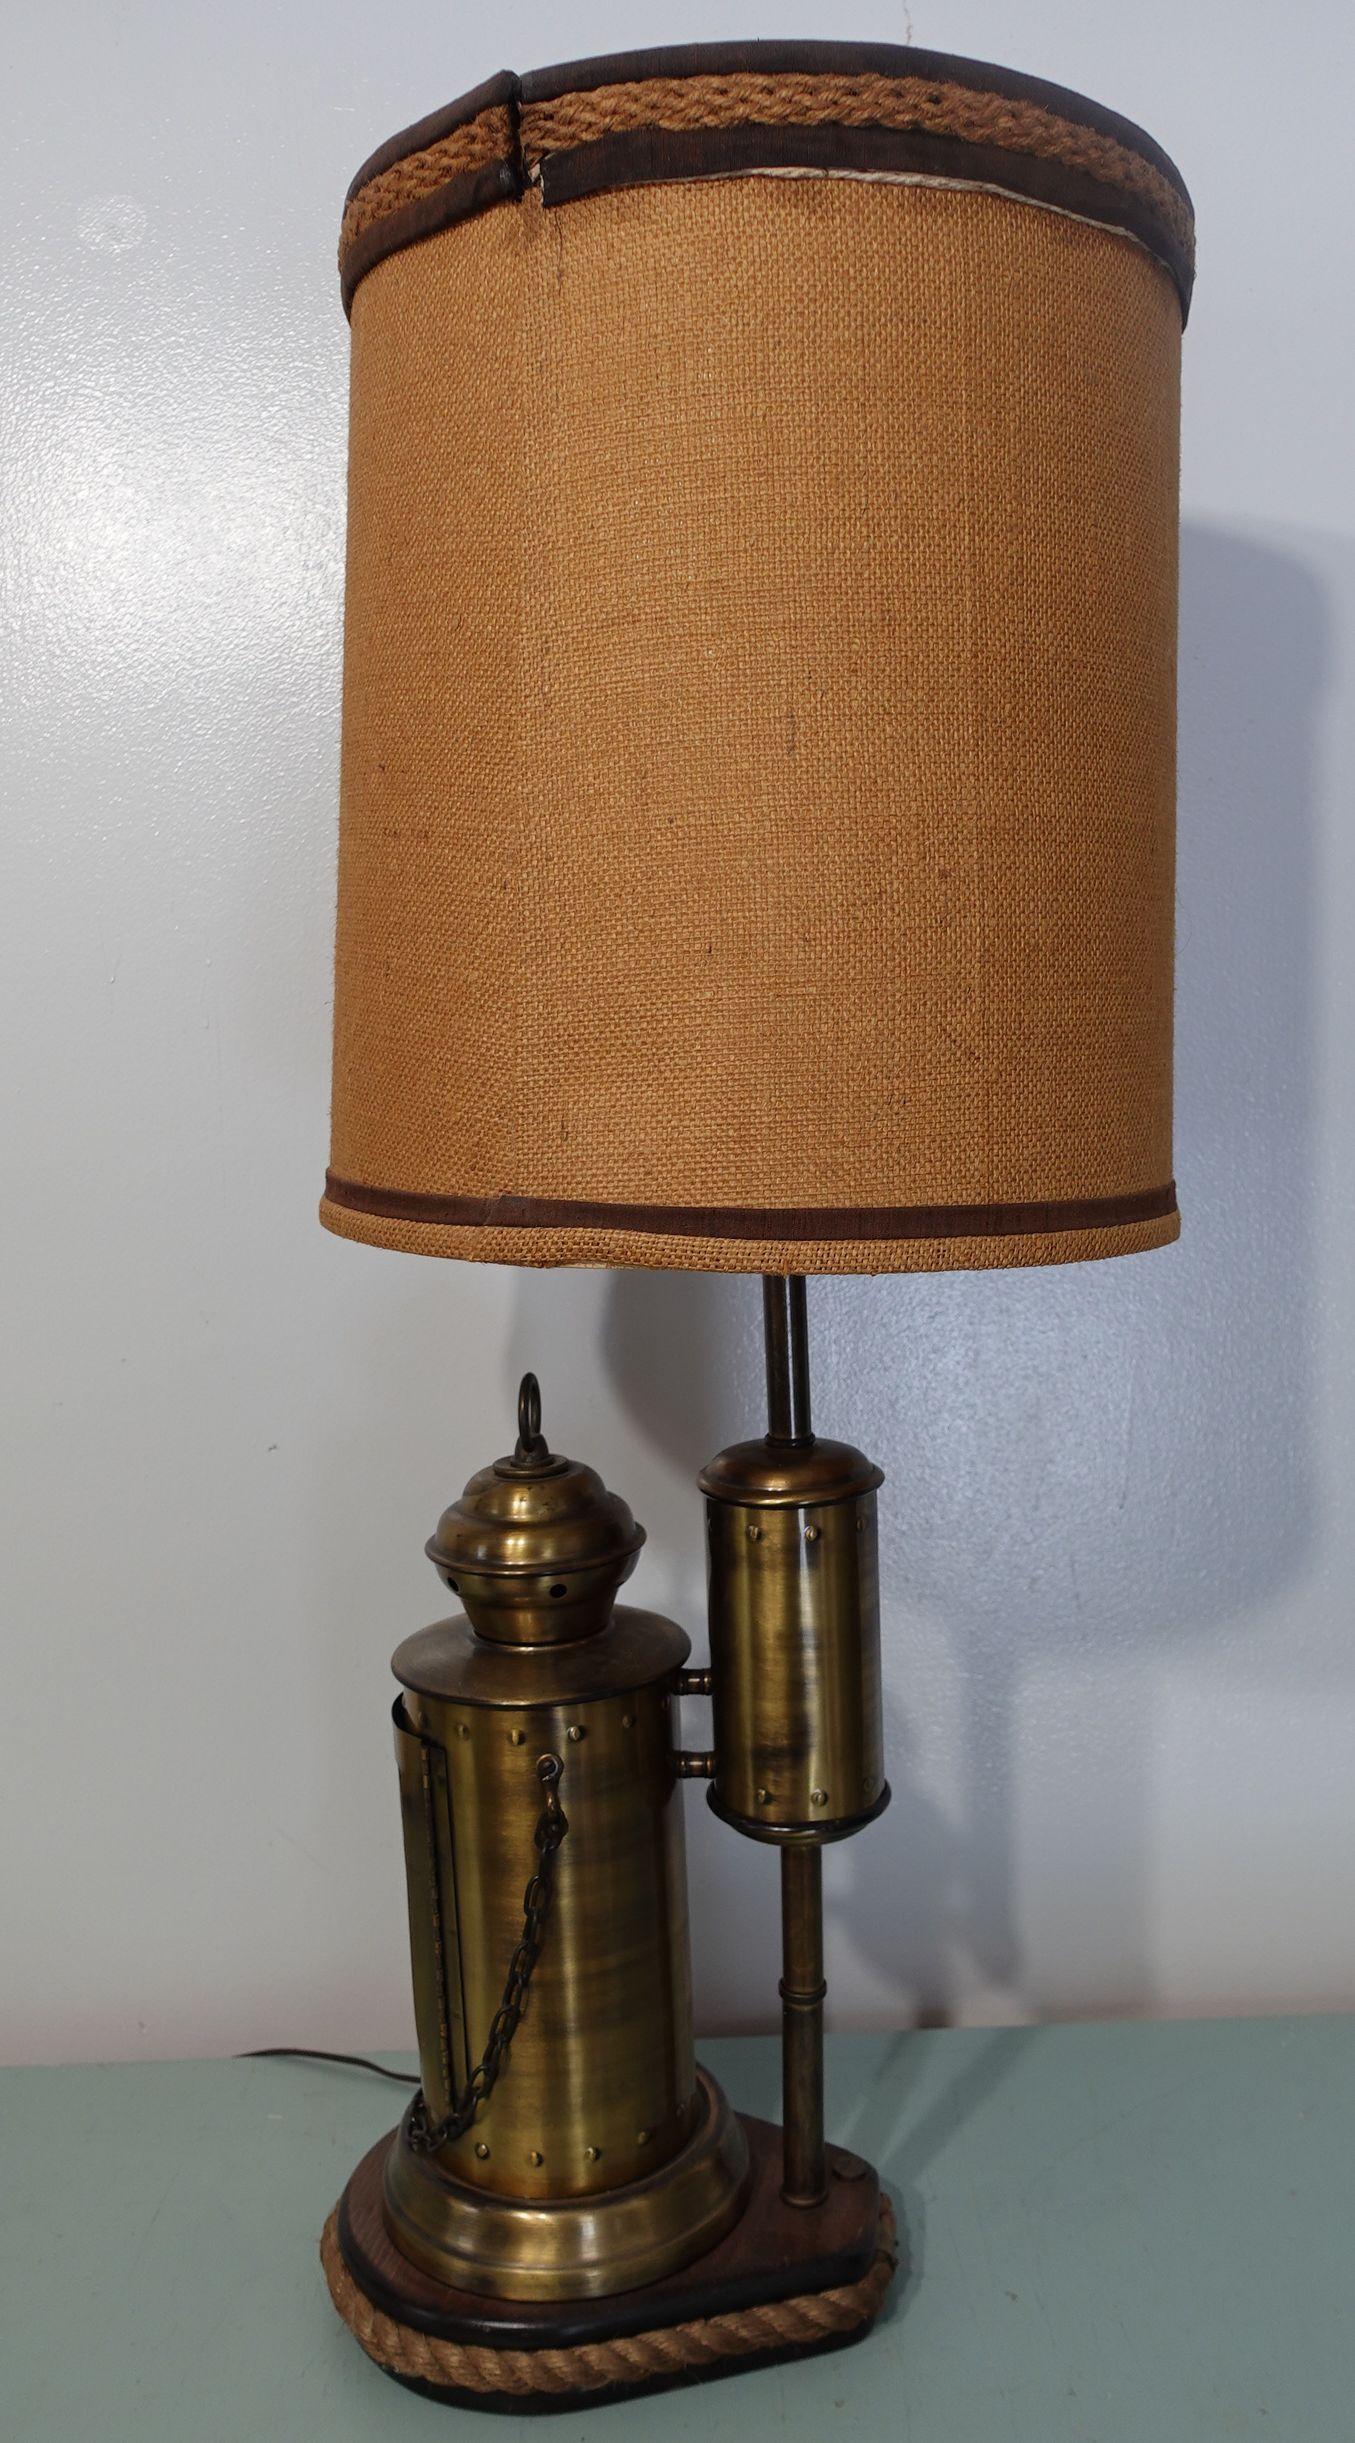 A large brasstable lamp with shade. It has 3 way liting, the bulb lited, the small red light candle-like lited, and both lited, very unique.



